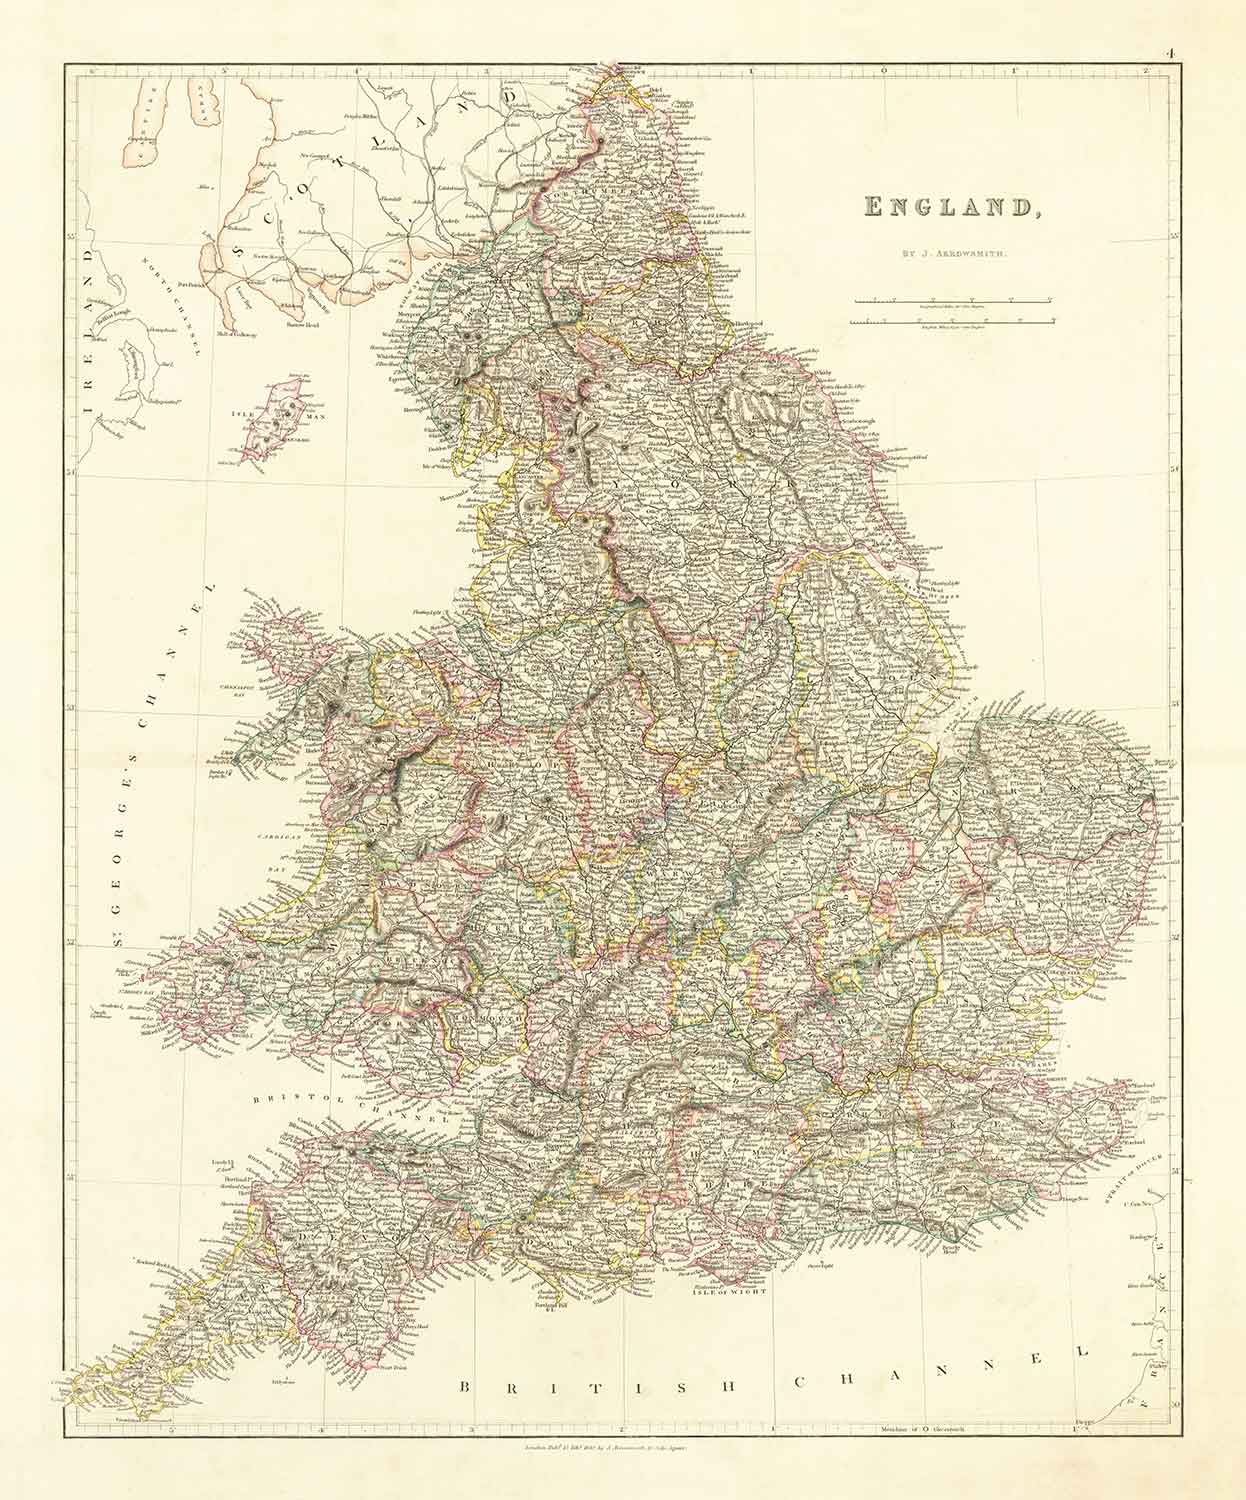 Old Map of England and Wales in 1832 by John Arrowsmith - Cities, Counties, Roads, Railway